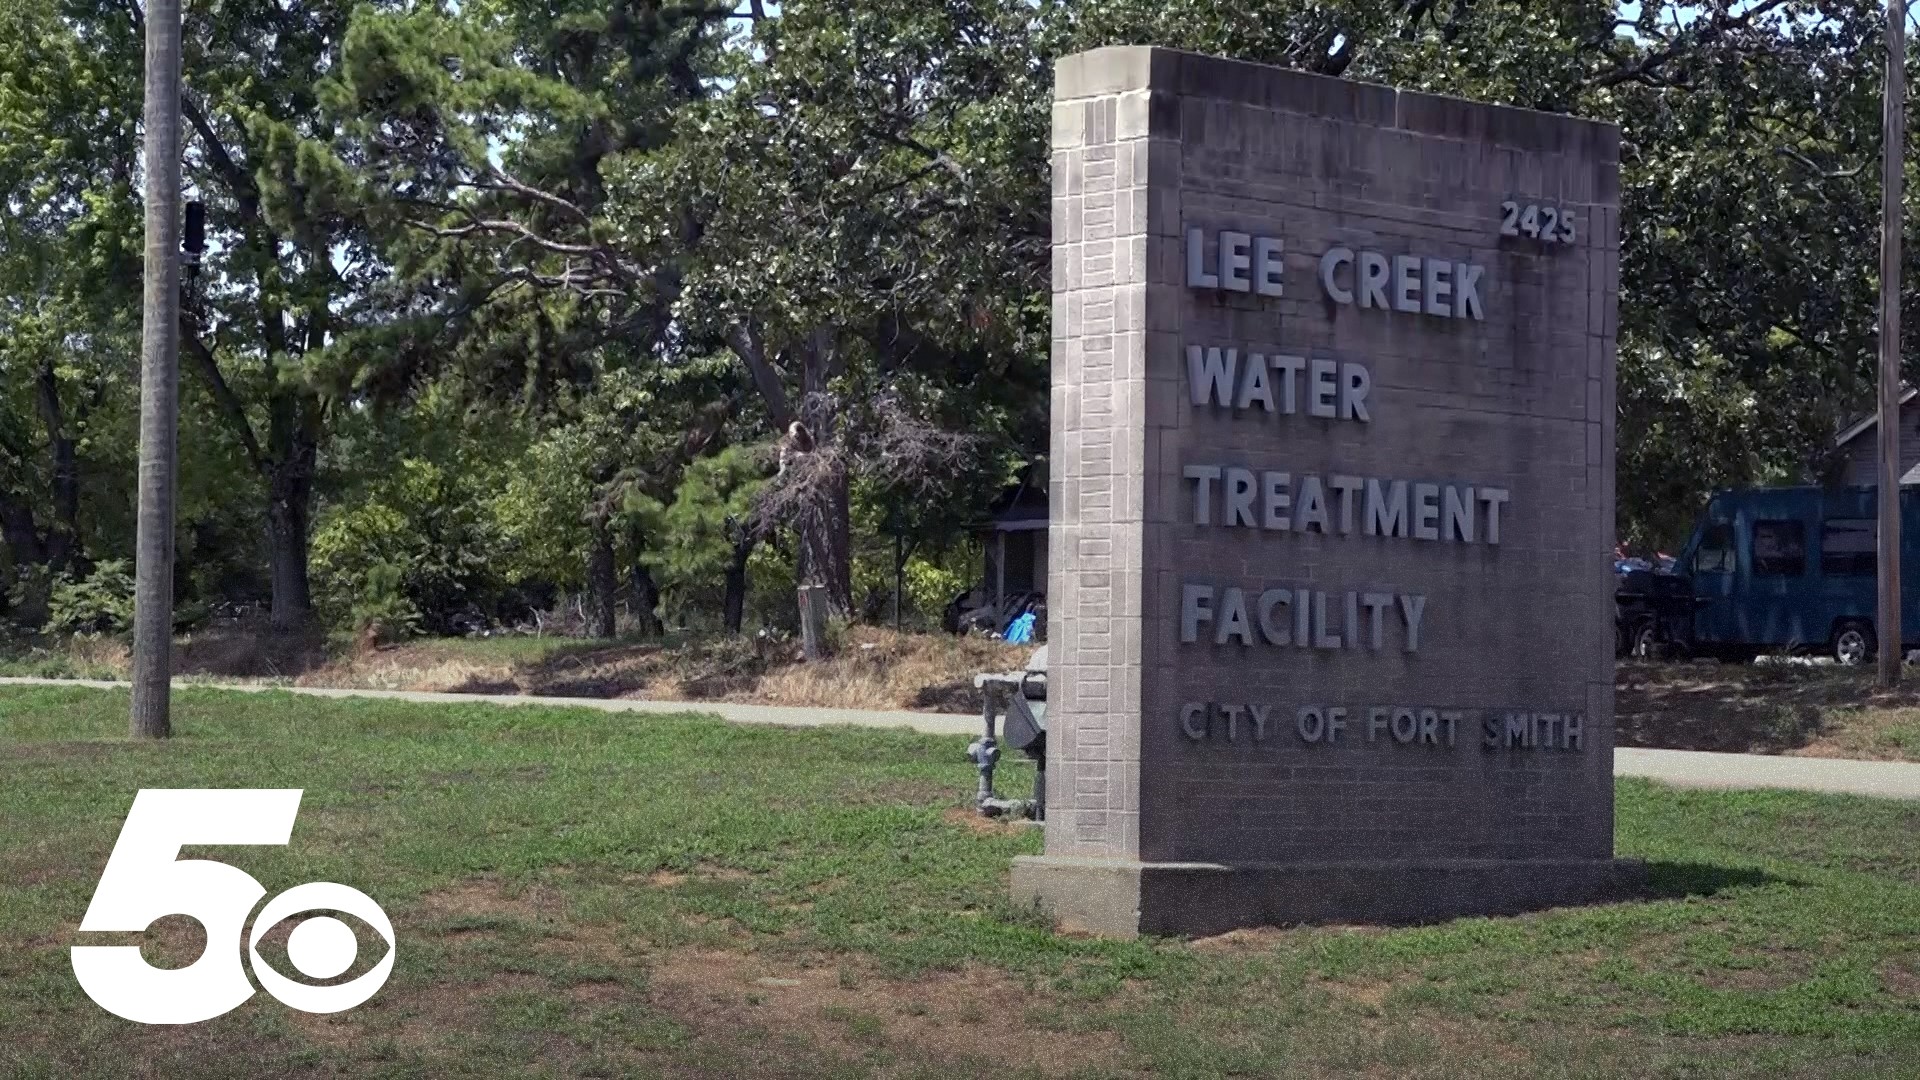 Because of emergency repairs needed at Lee Creek Water Treatment Plant, Fort Smith residents must restrict their water usage.